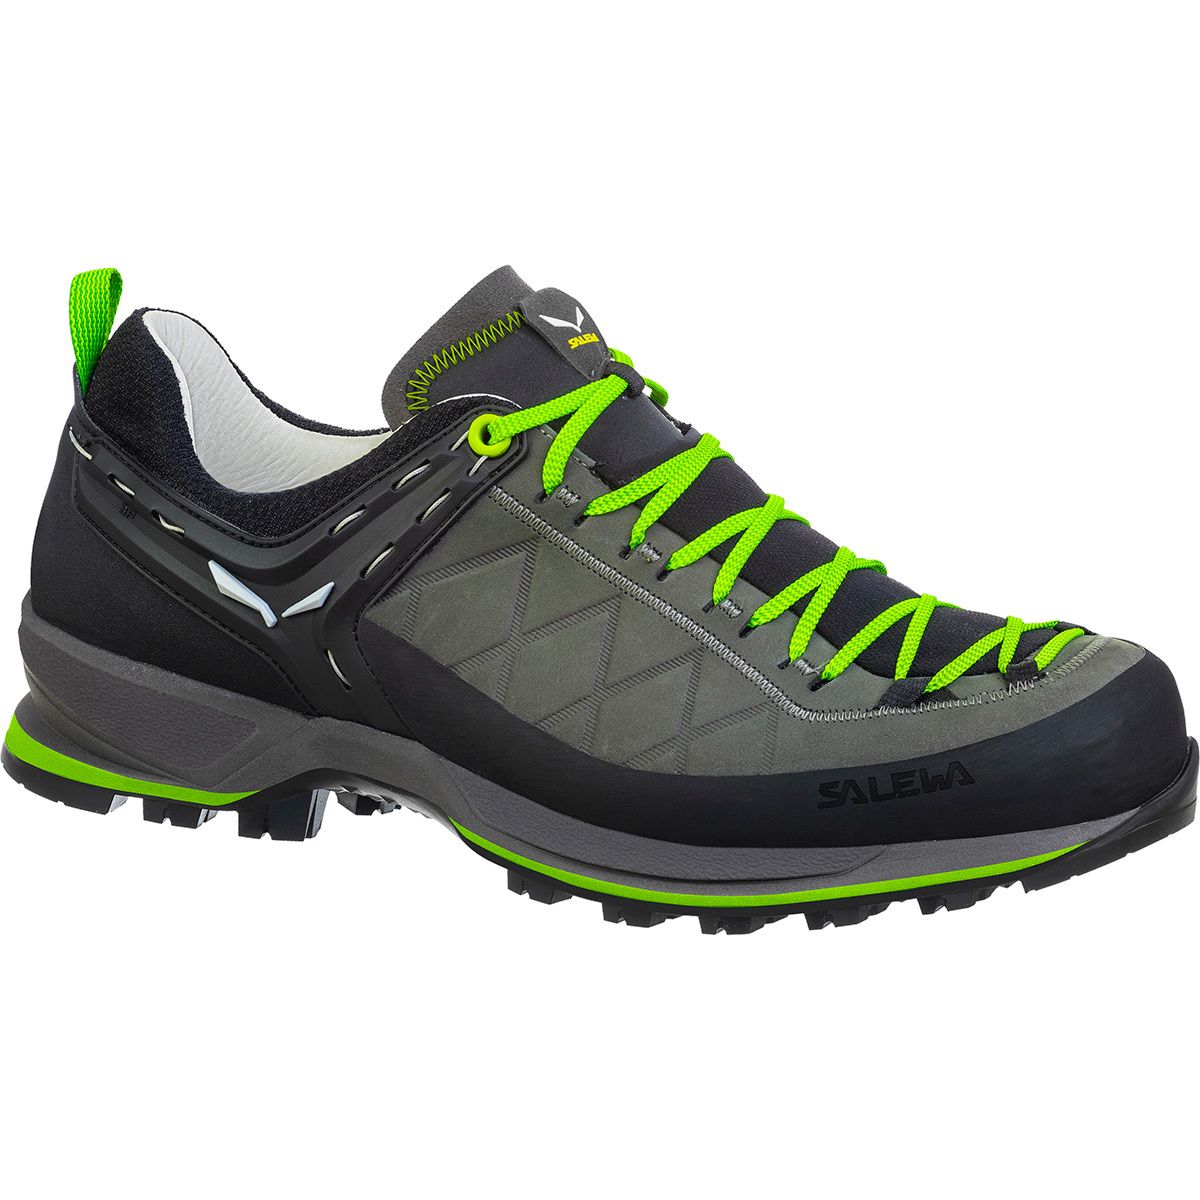 Mountain Trainer 2 Leather Hiking Shoe - Men